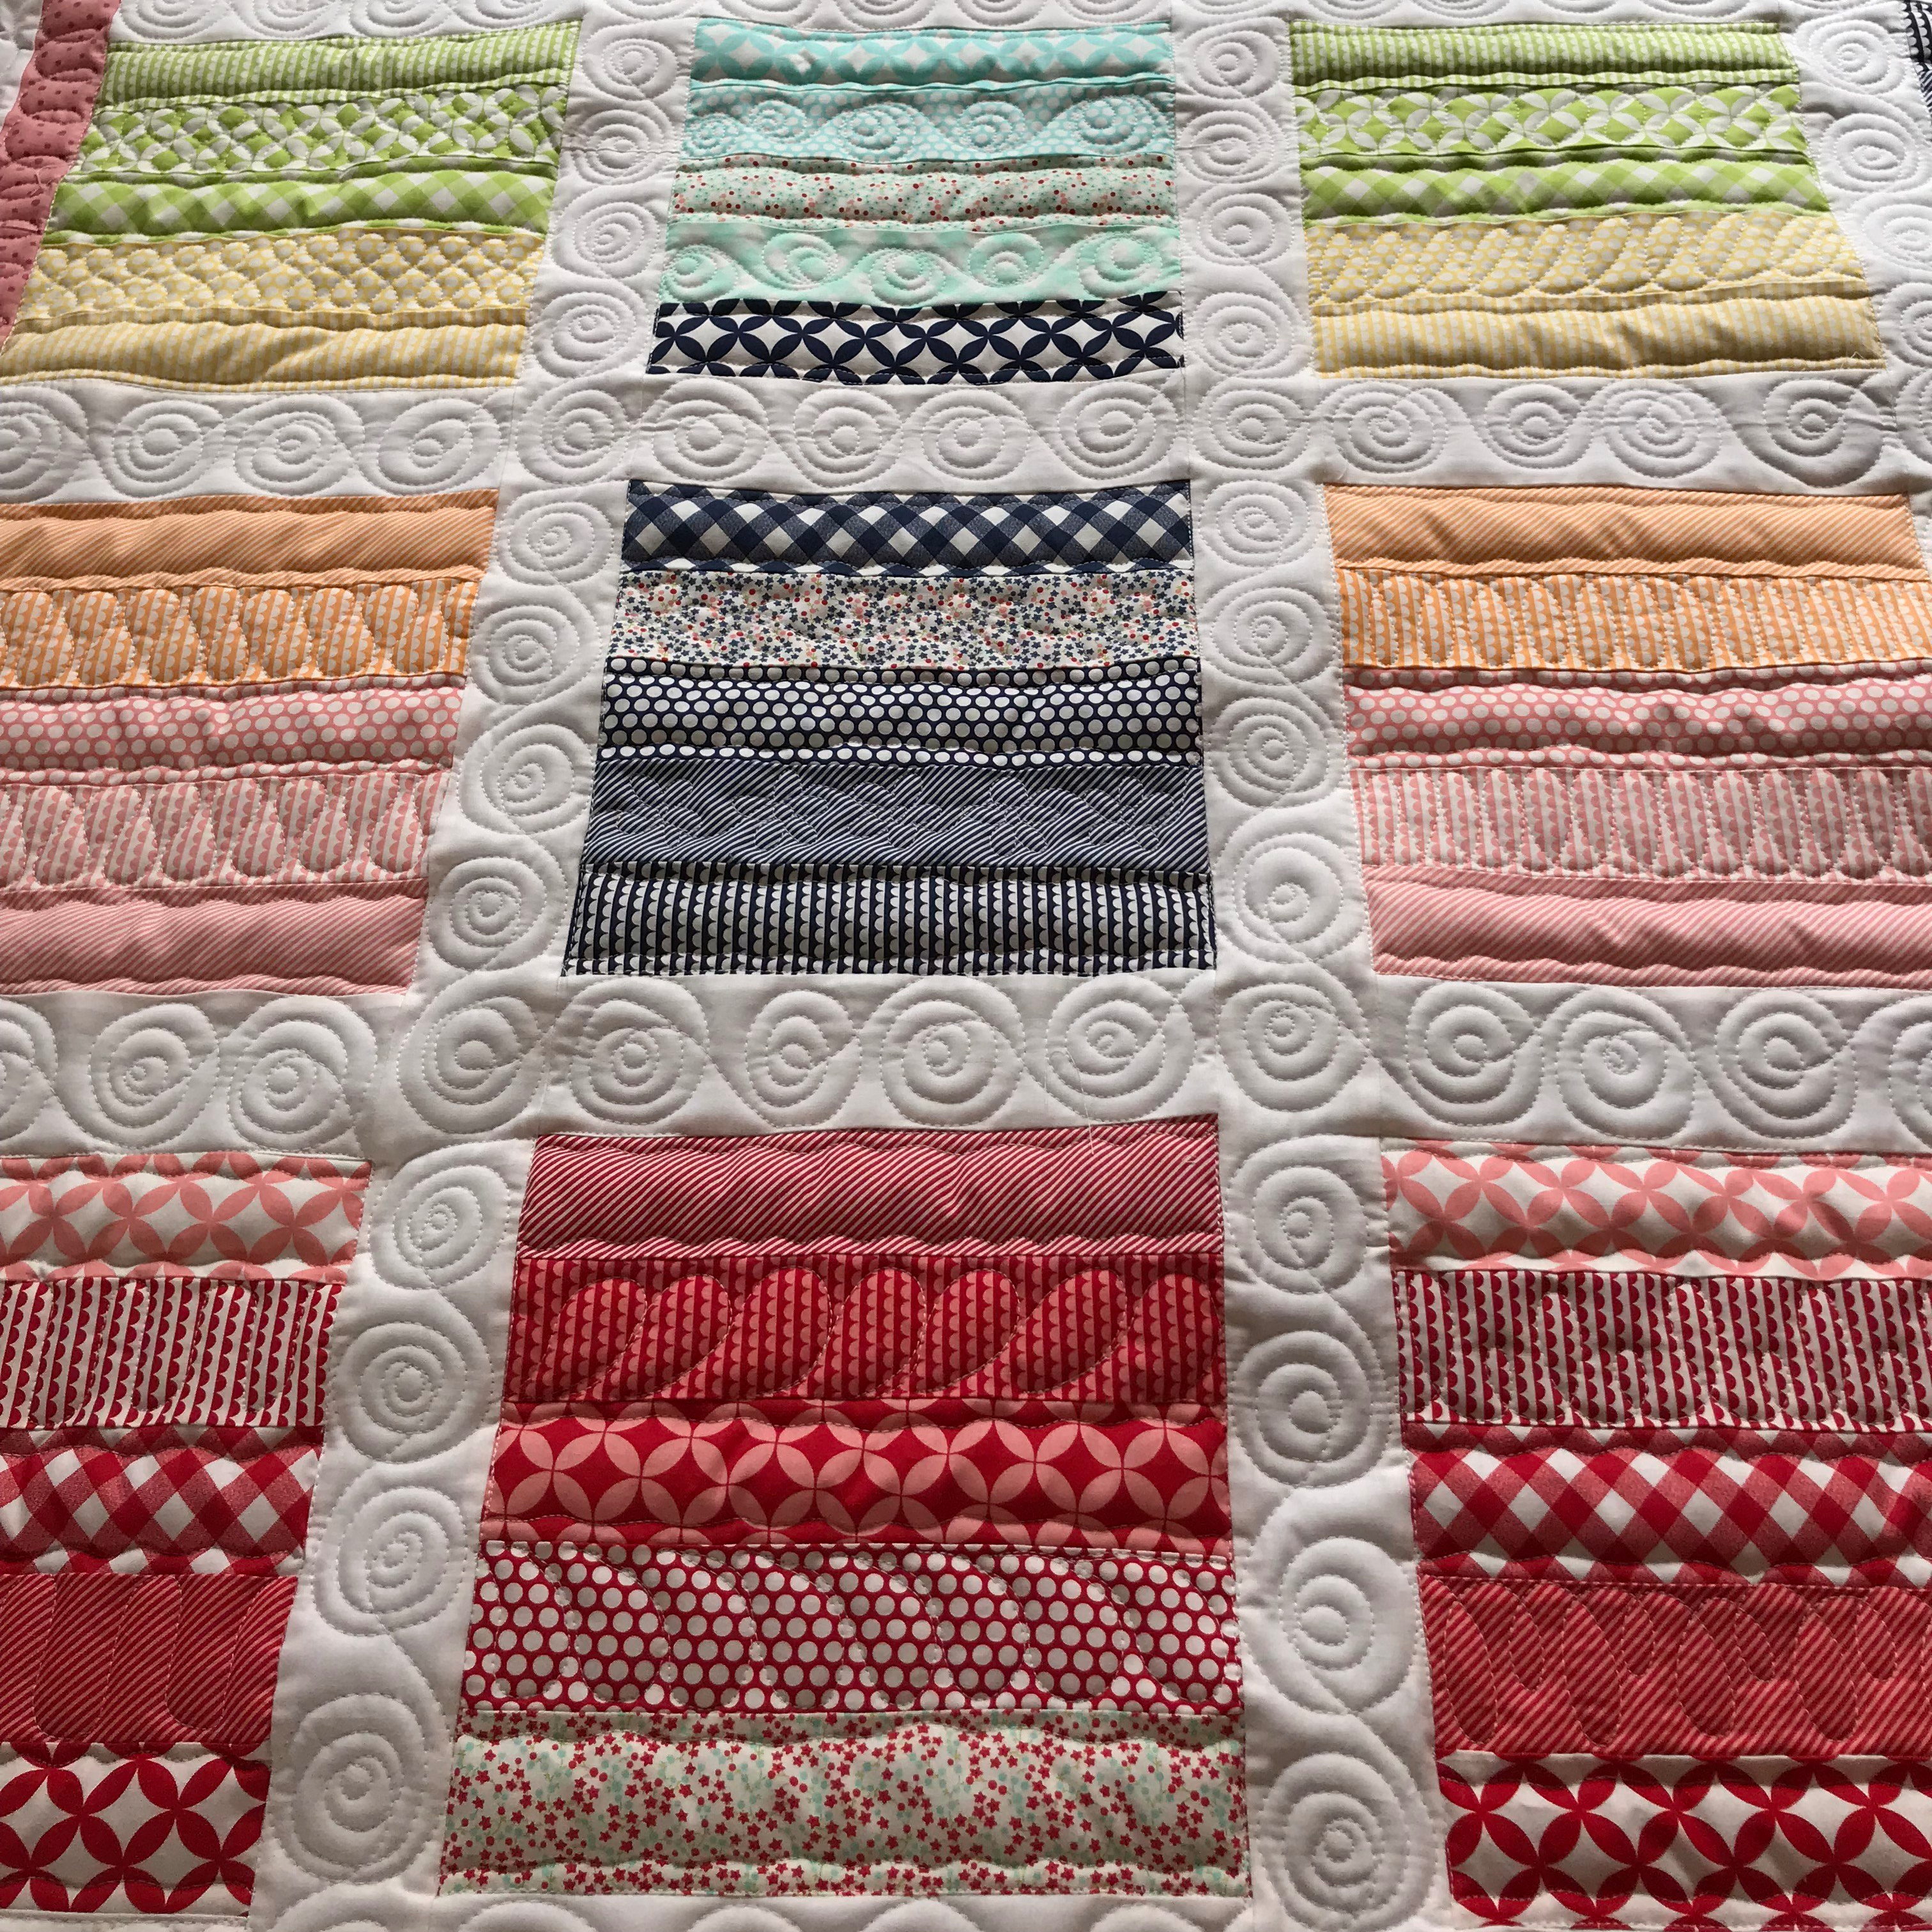 Thimble Blossoms basics jelly roll quilt; square quilt with sash